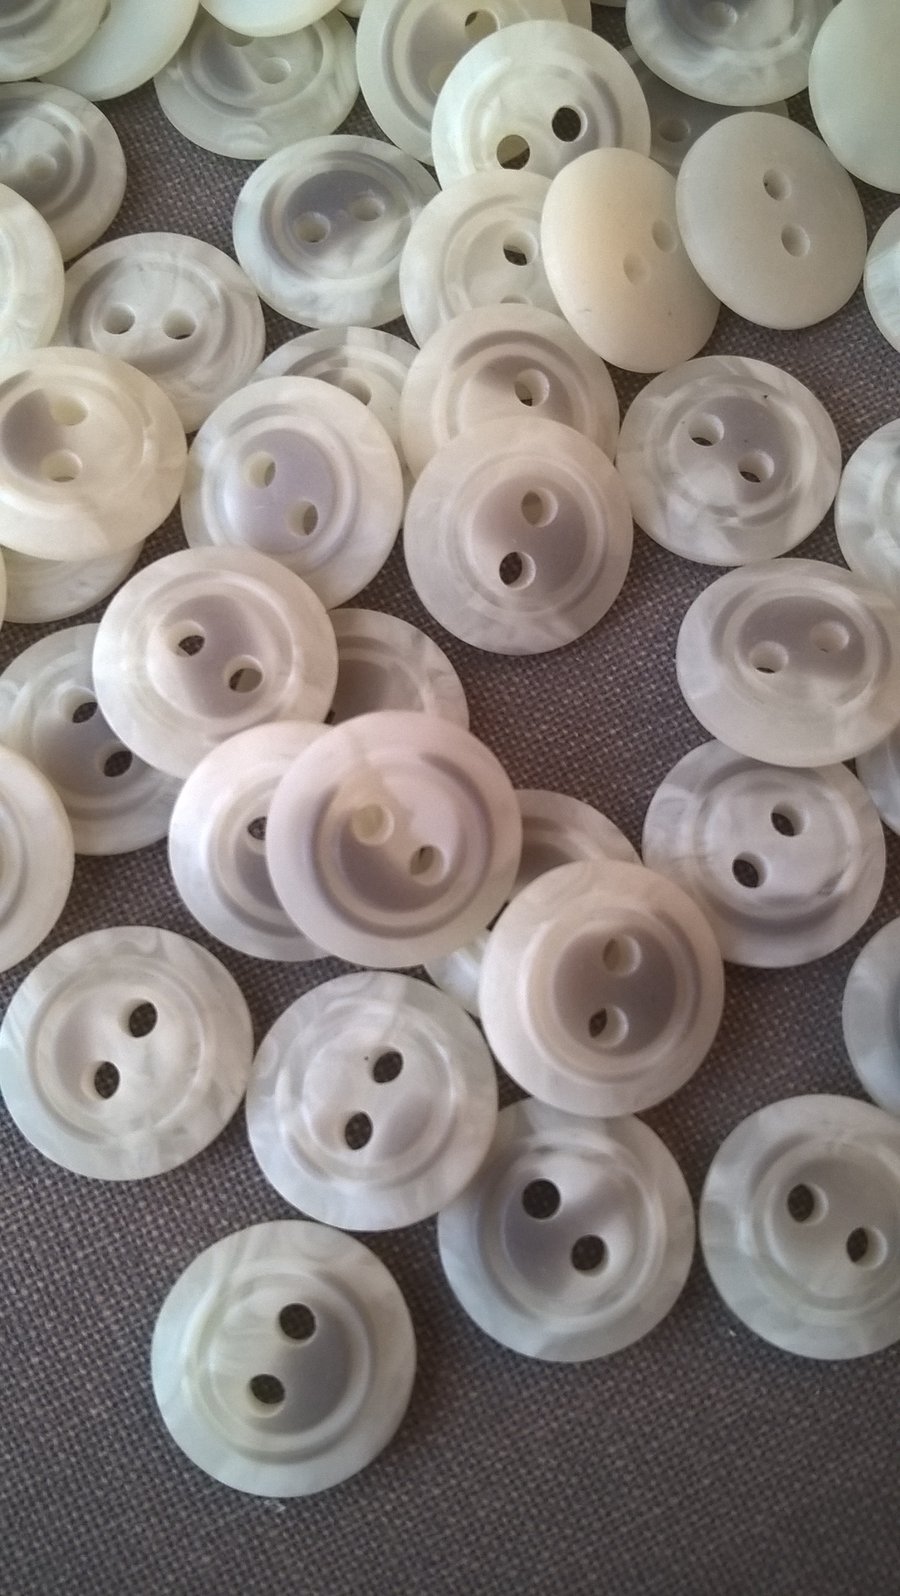 12mm grey and off-white small buttons 2-hole, pack of 20